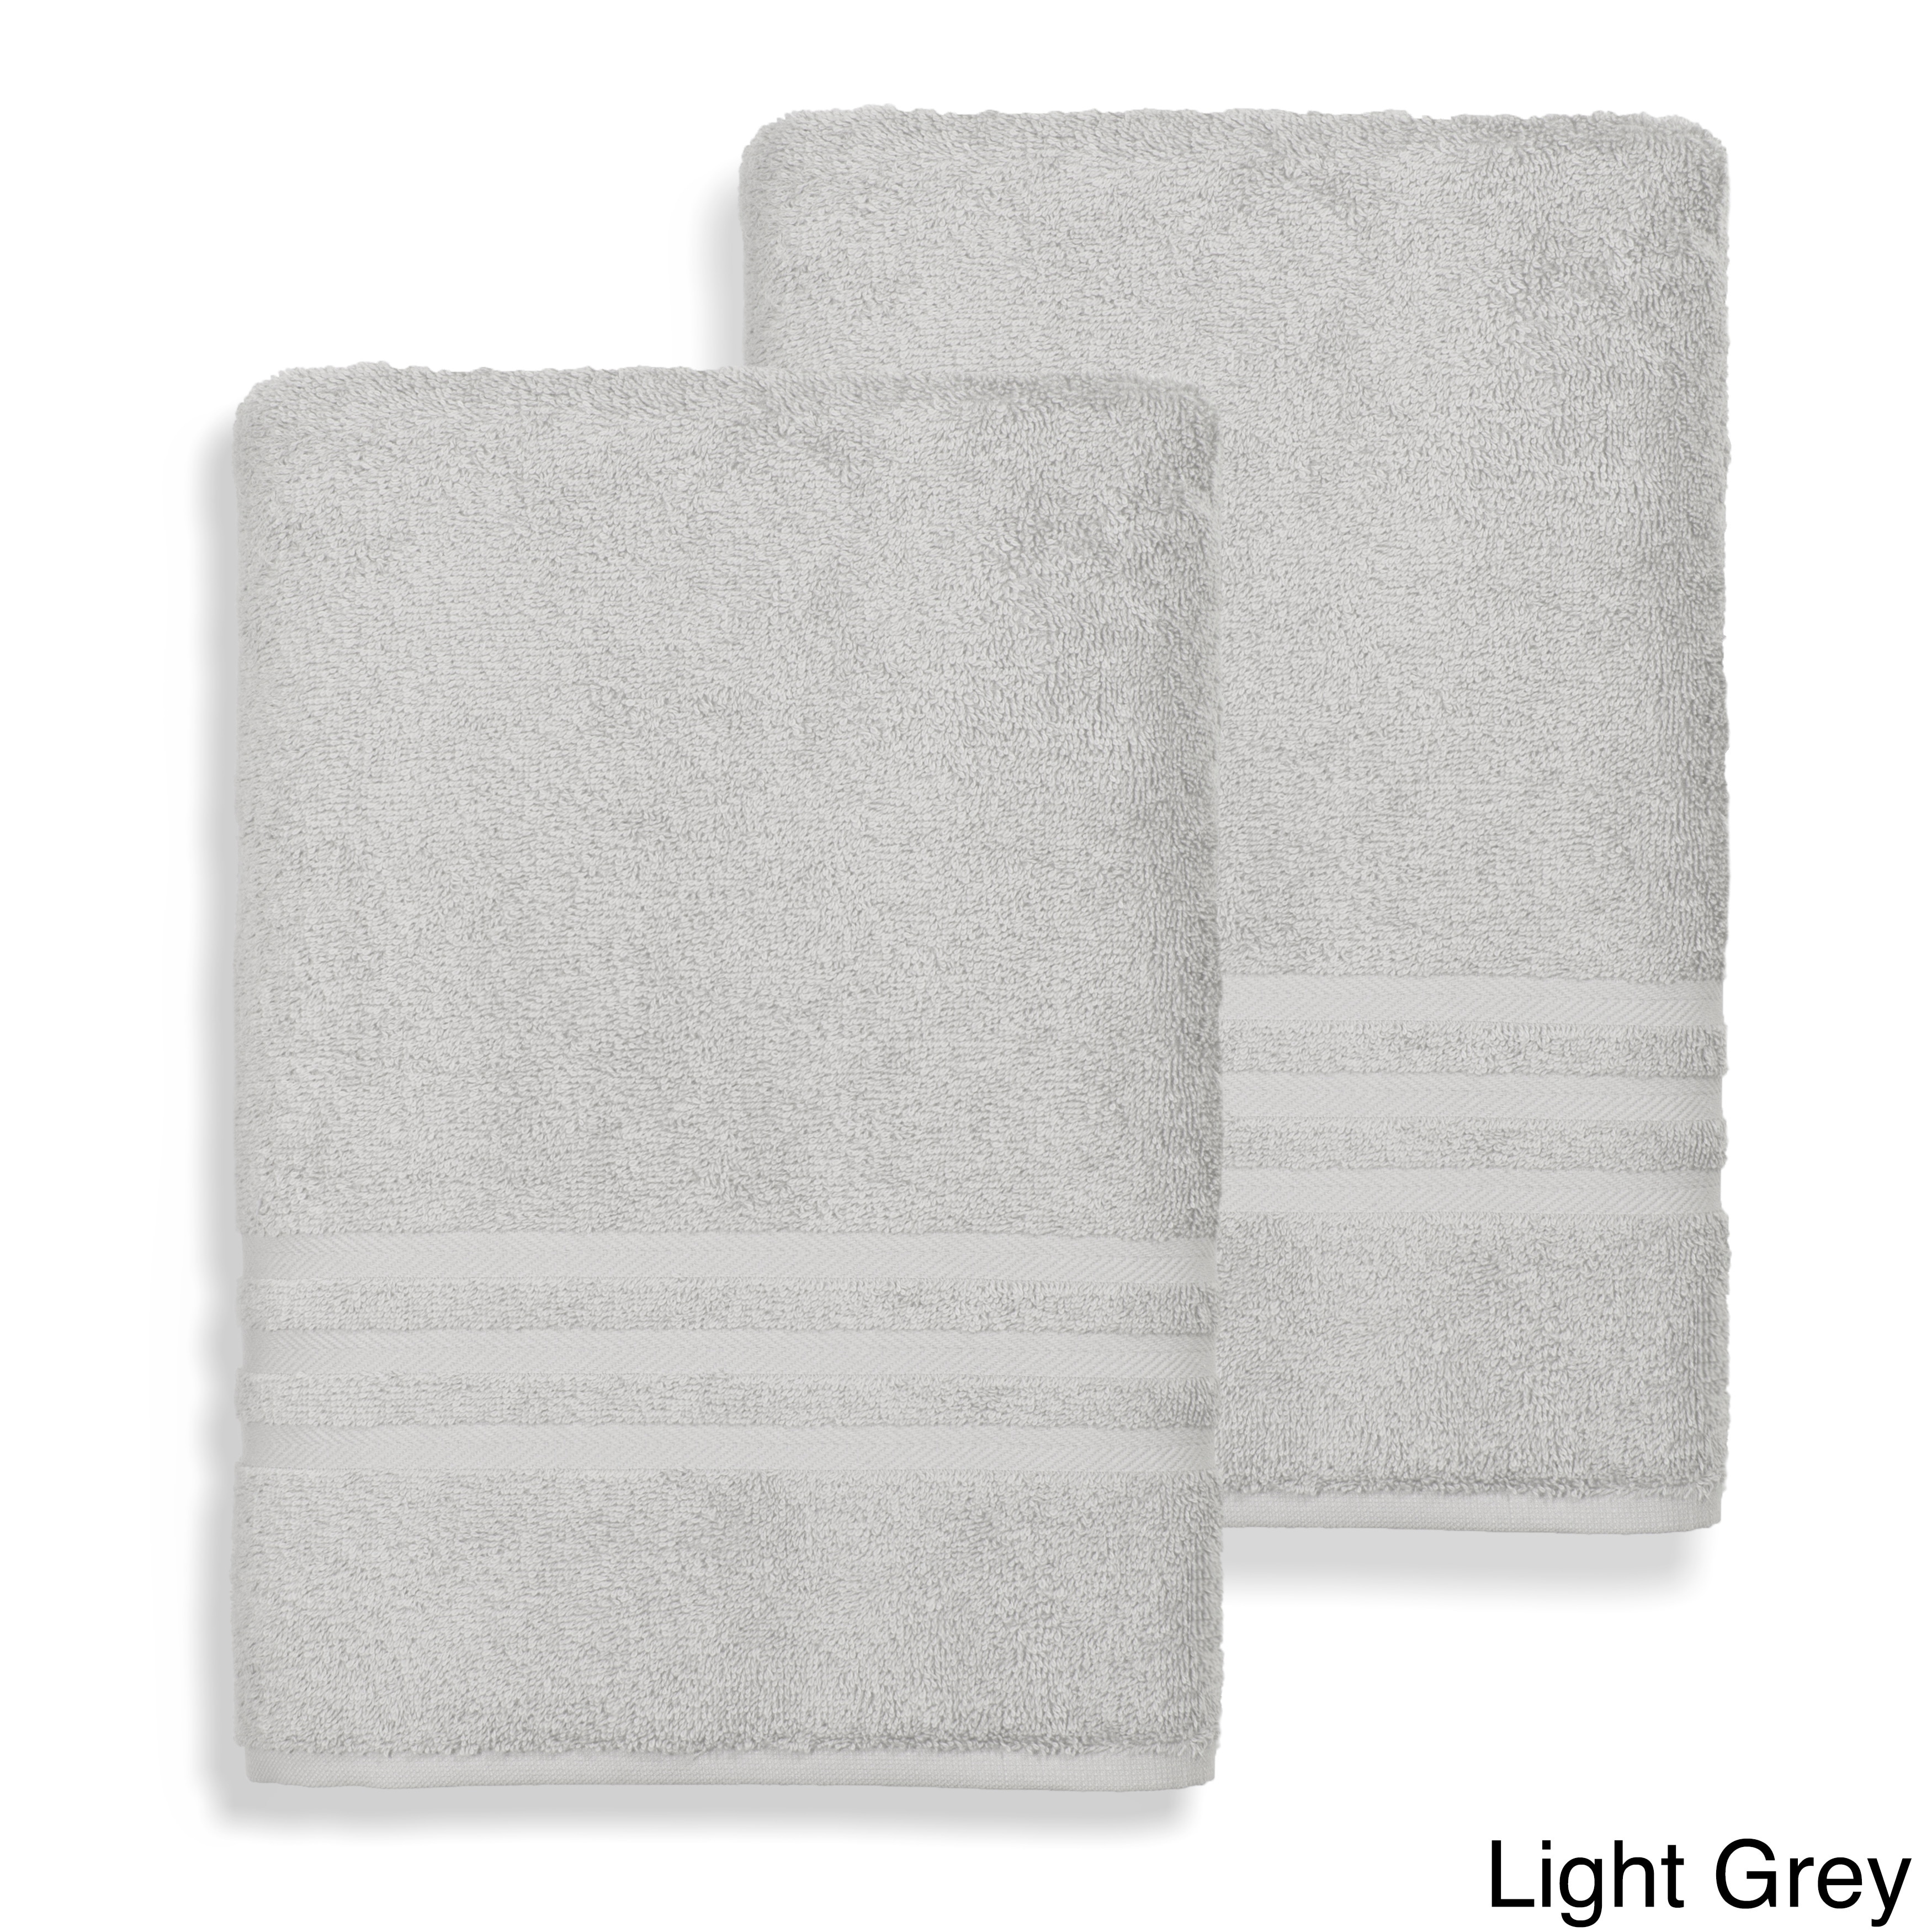 https://ak1.ostkcdn.com/images/products/12855990/Authentic-Hotel-and-Spa-Omni-Turkish-Cotton-Terry-Oversized-Bath-Sheet-Towels-Set-of-2-0dbe4530-a490-492a-b5e7-7fb2f71fc2ff.jpg